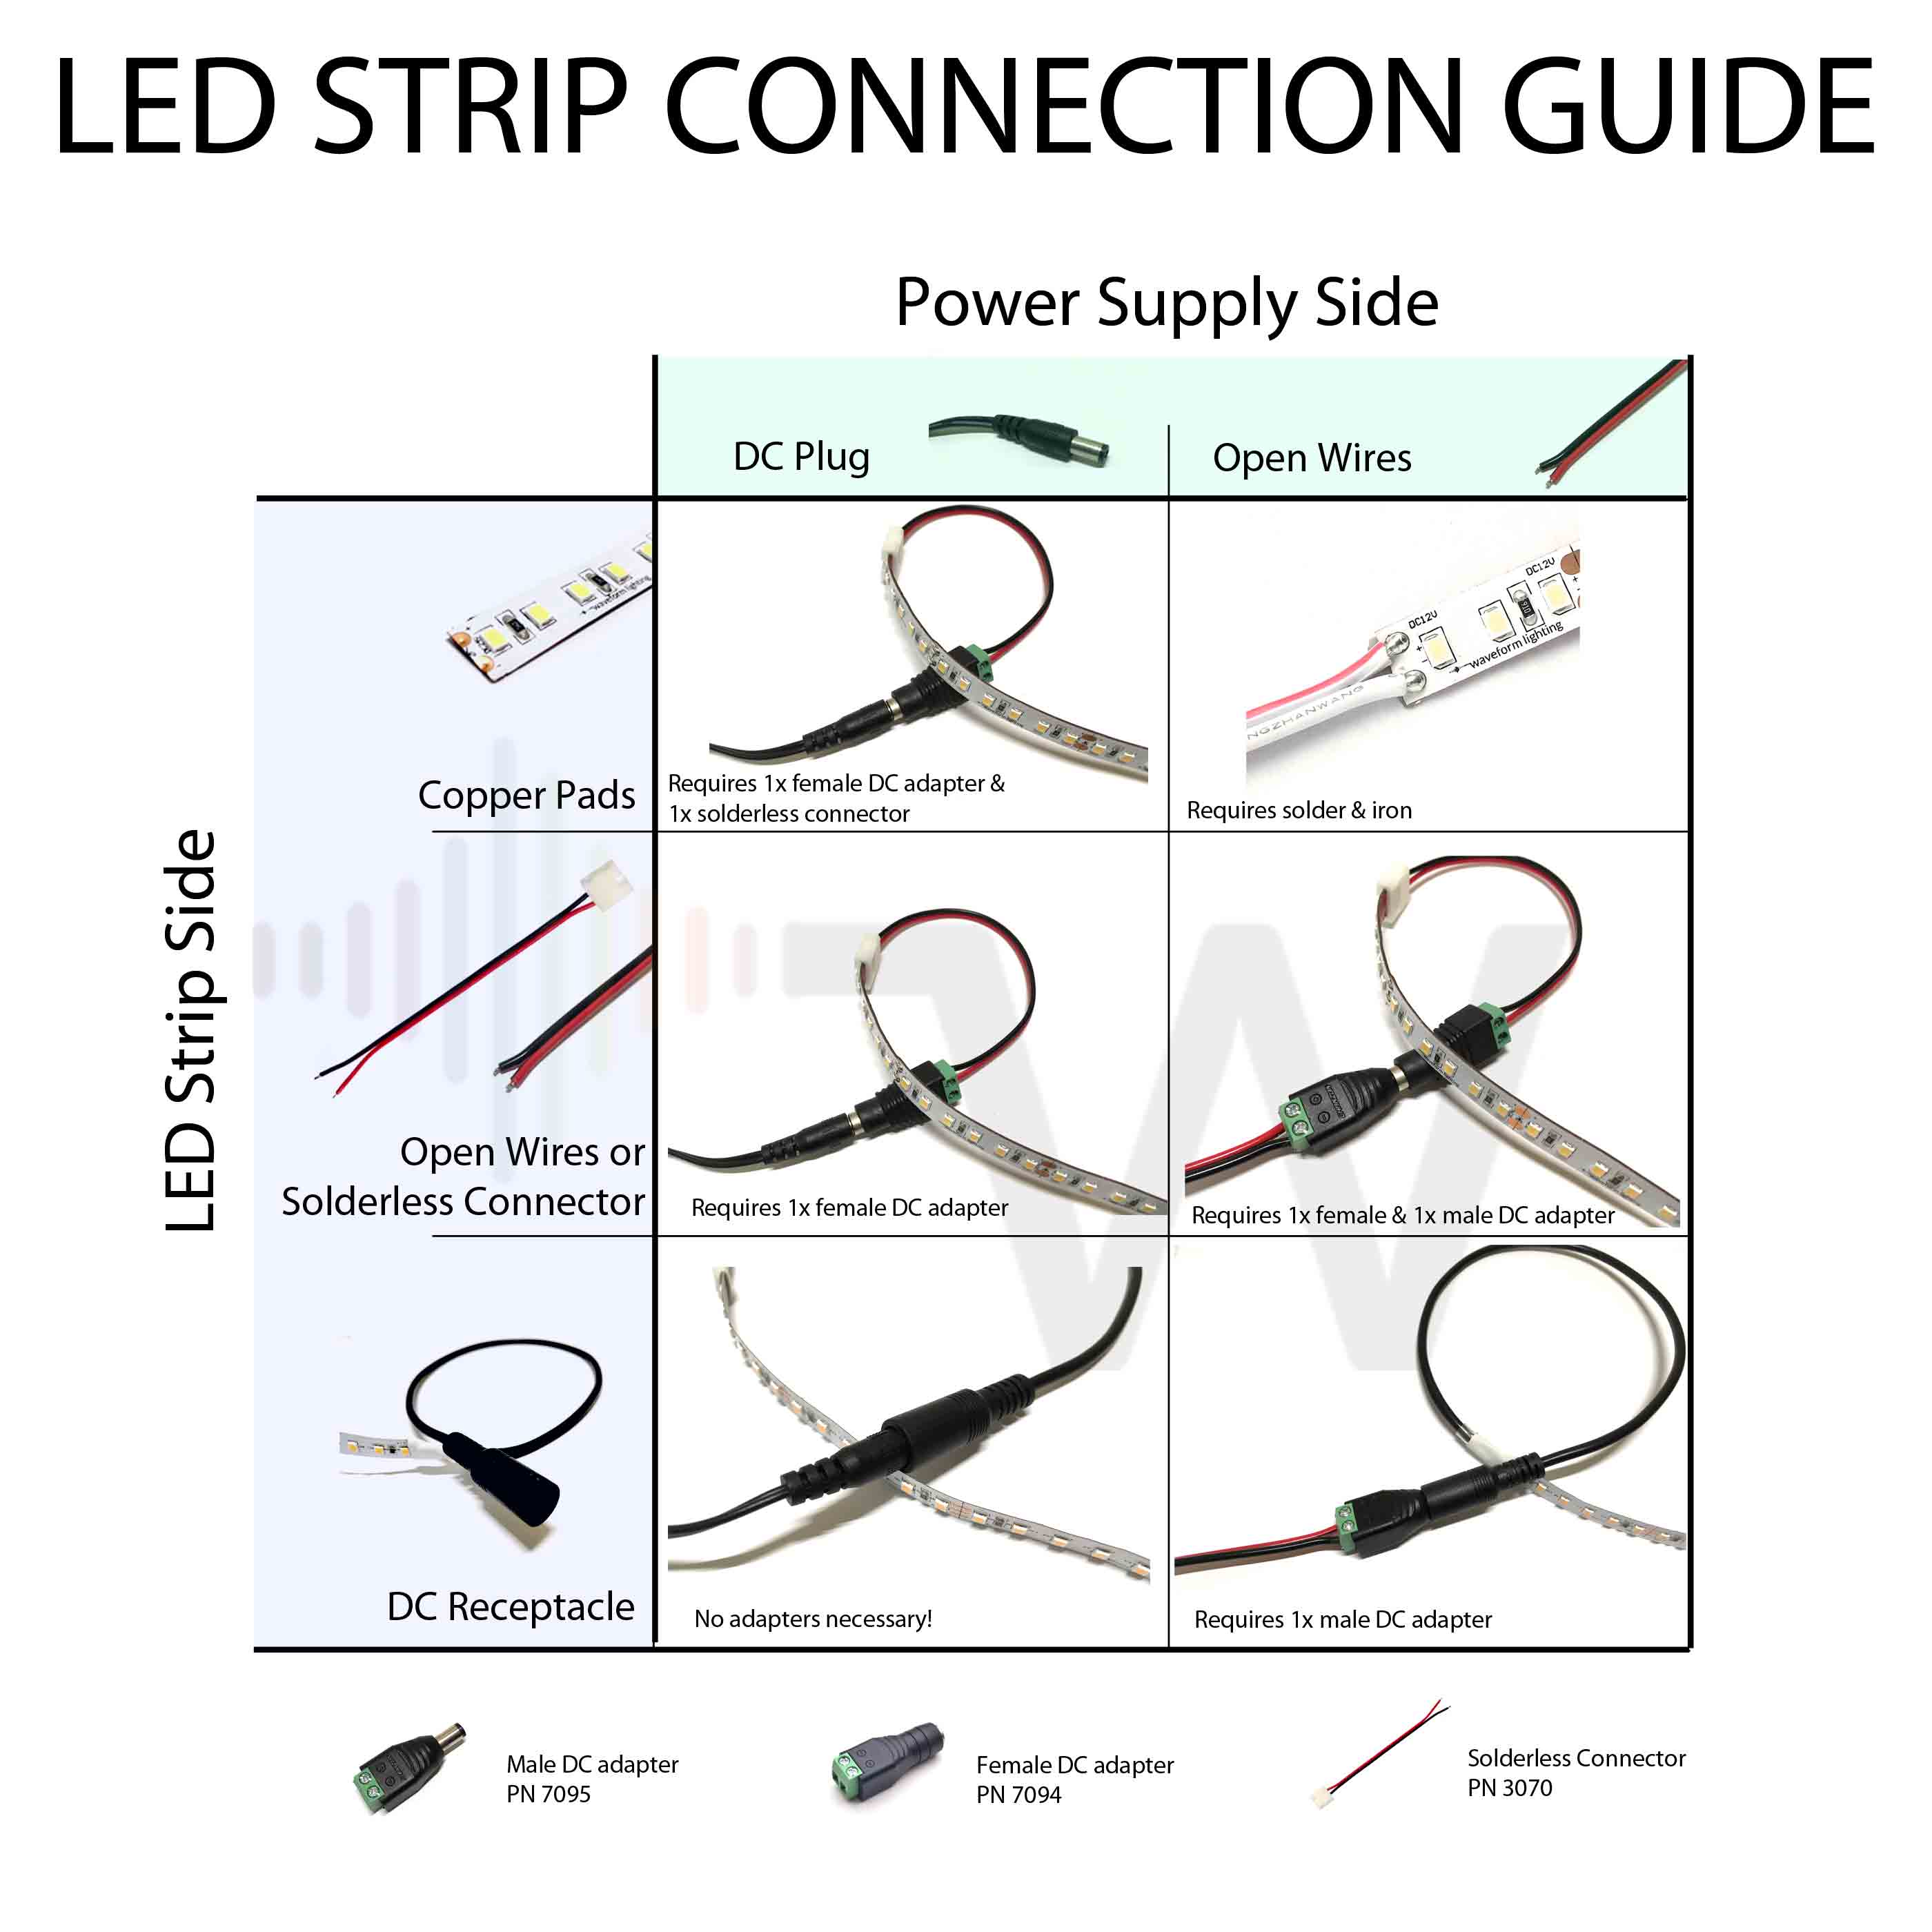 Joining led strips